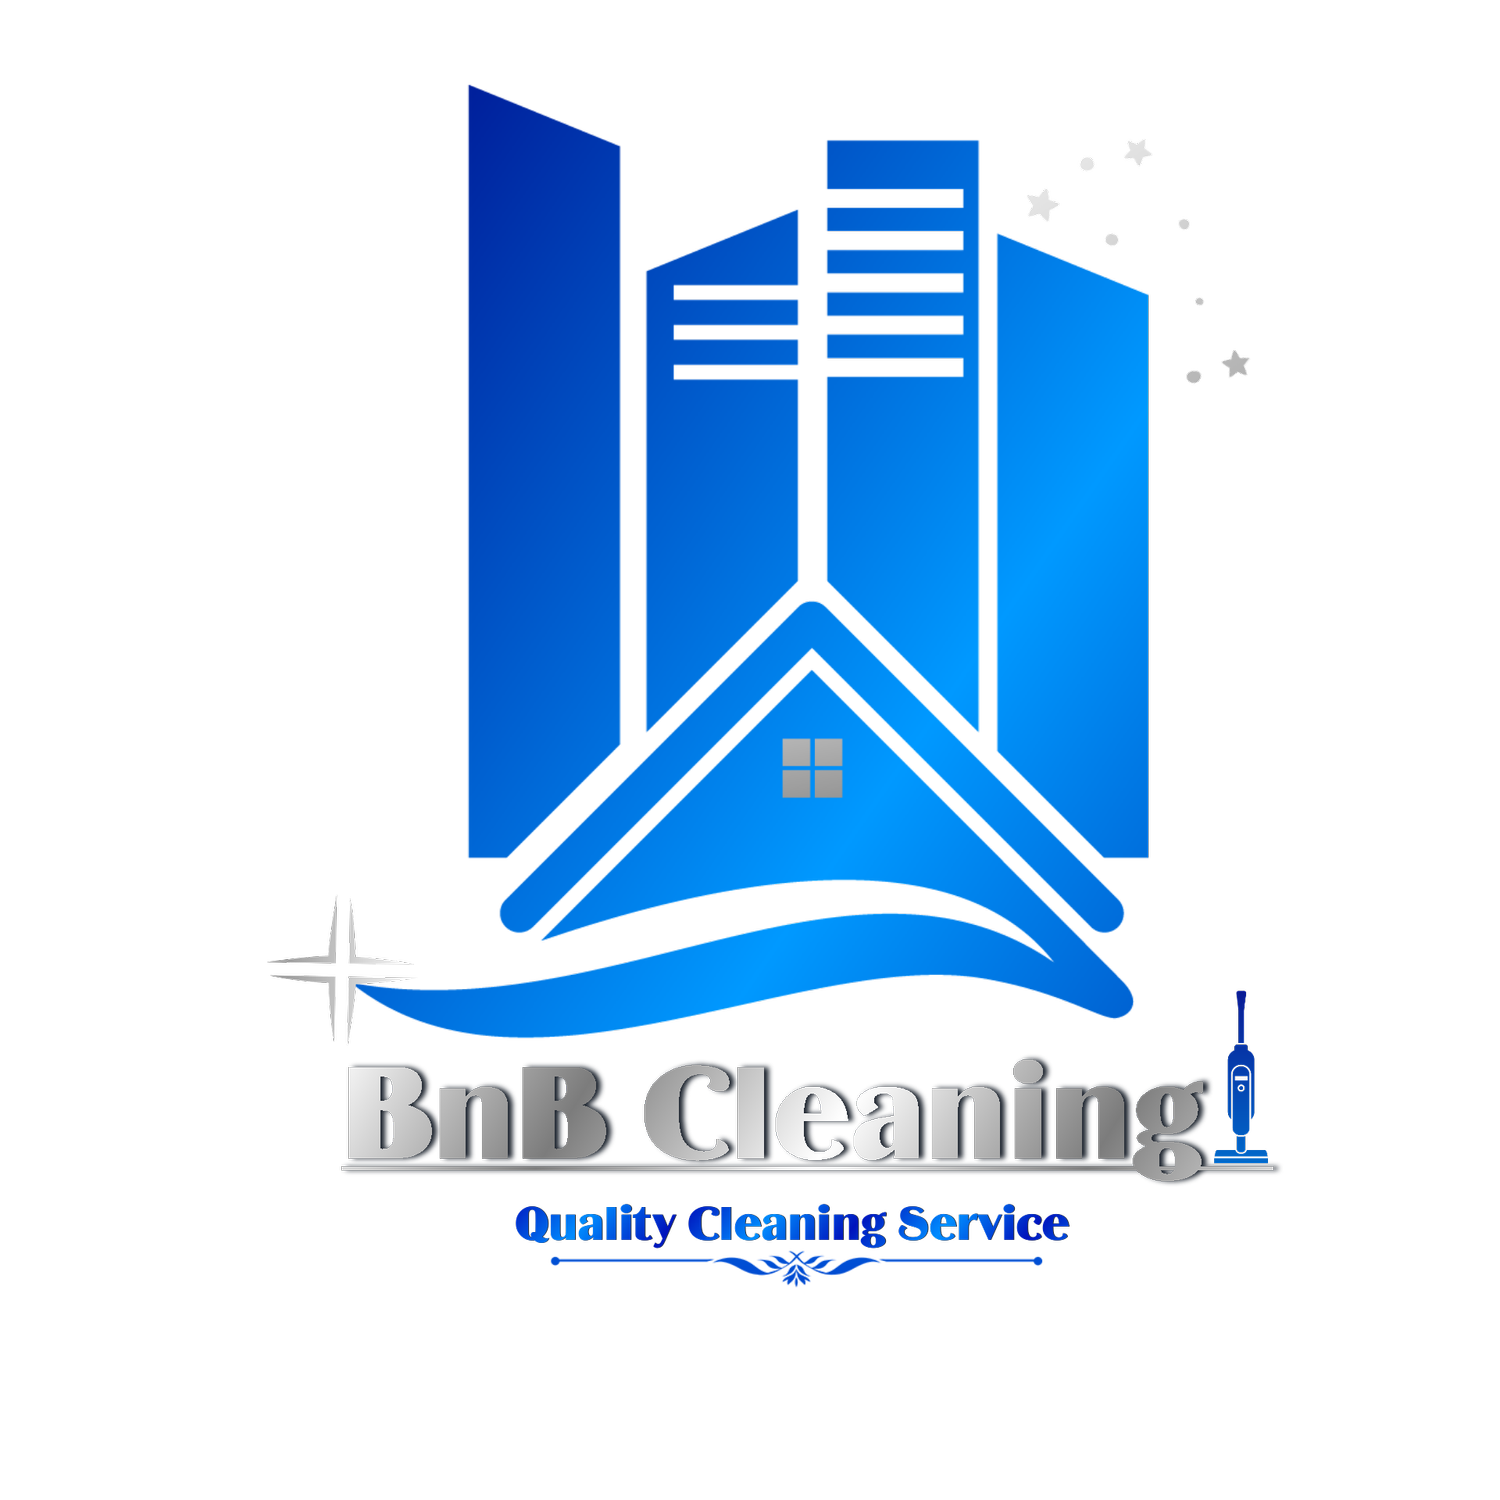 BnB Cleaning